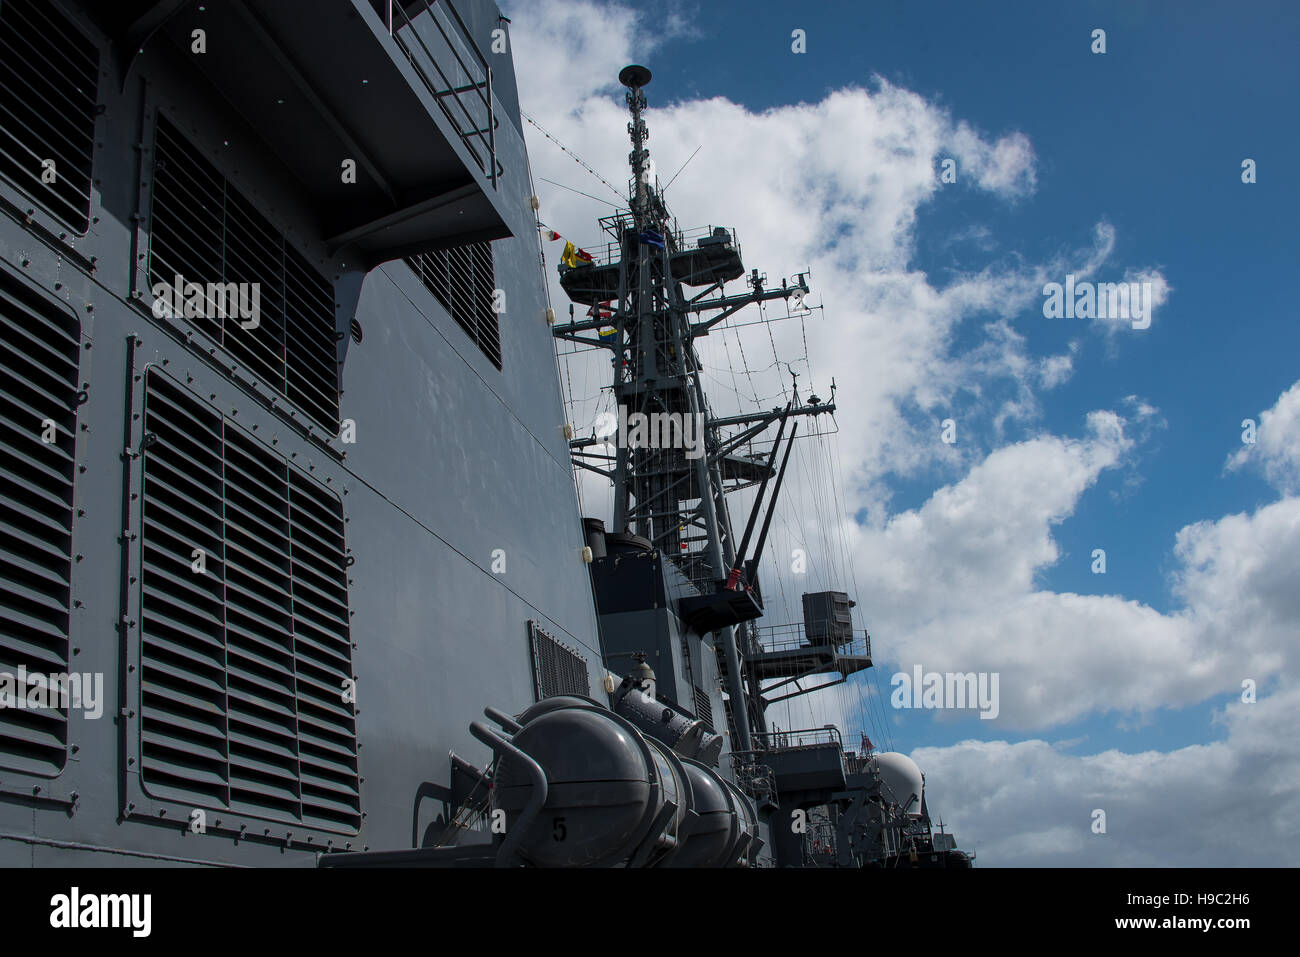 Part of the deck with radar tower on a modern warship Stock Photo